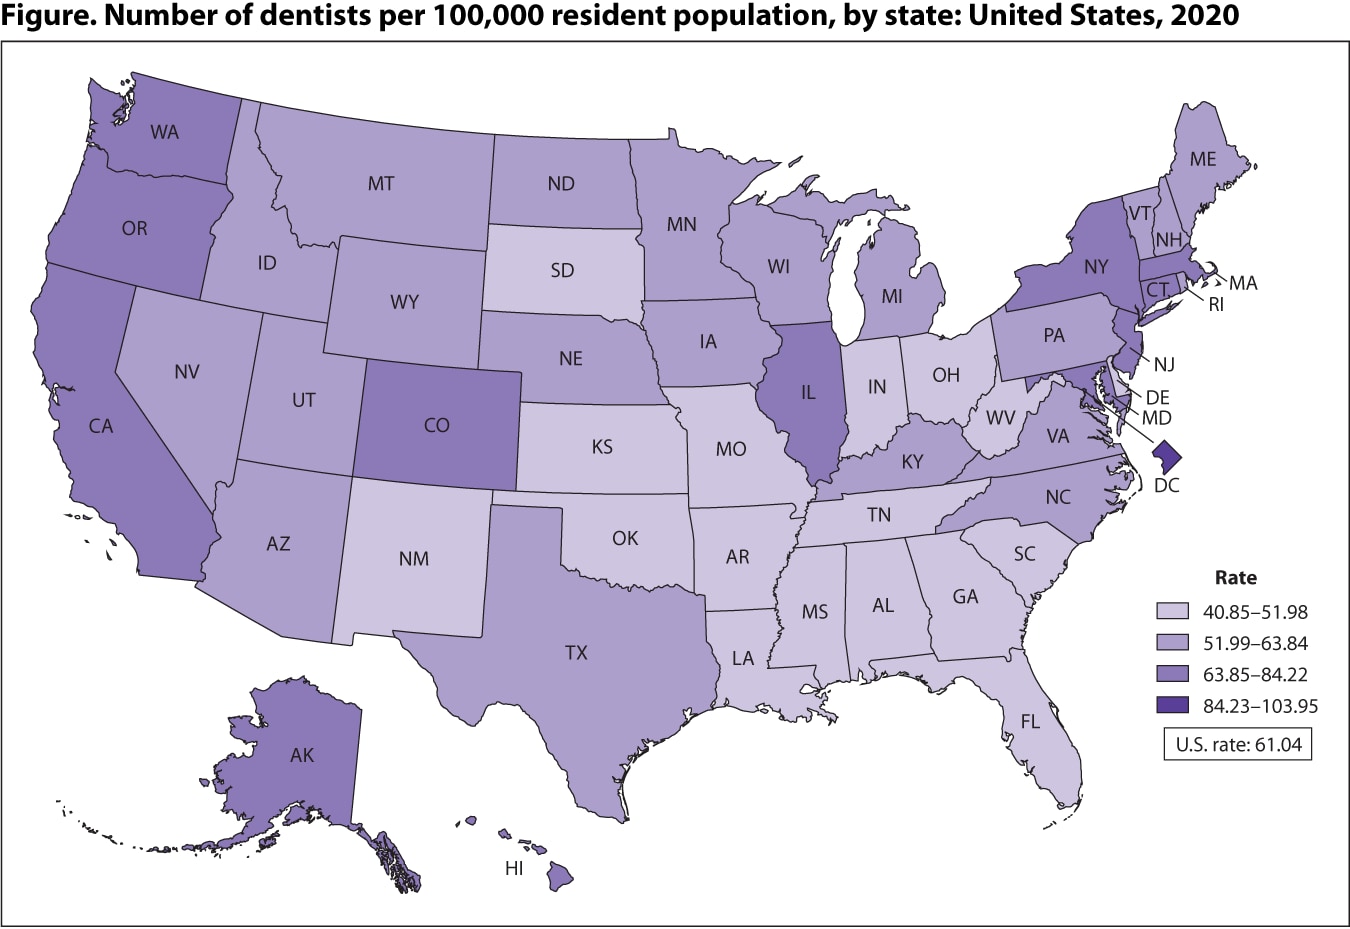 Figure is a map of the United States showing the number of dentists per 100,000 resident population in each of the 50 states and the District of Columbia for 2020.